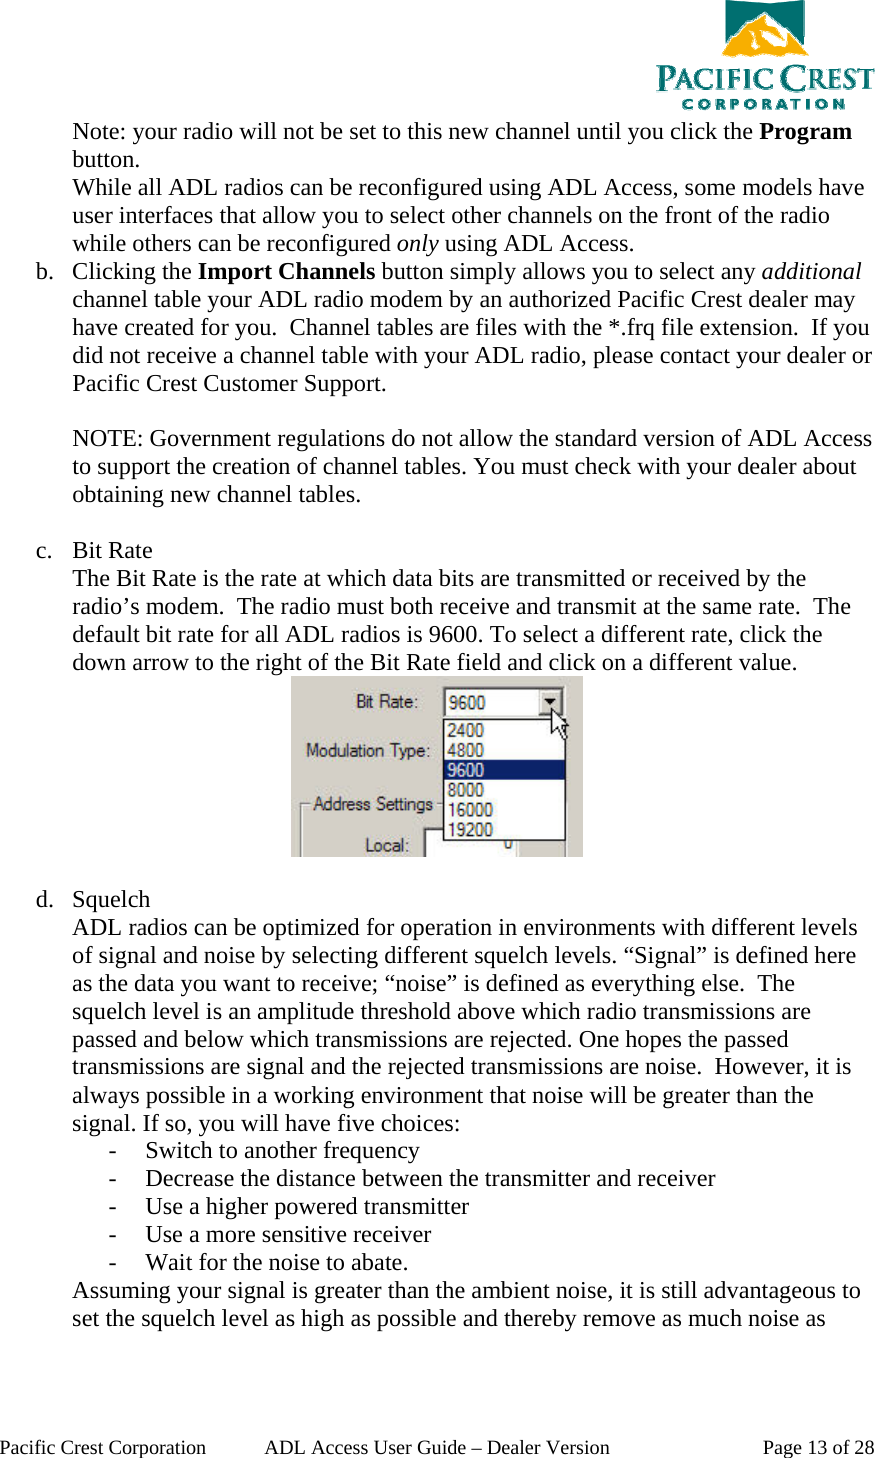  Pacific Crest Corporation  ADL Access User Guide – Dealer Version  Page 13 of 28 Note: your radio will not be set to this new channel until you click the Program button. While all ADL radios can be reconfigured using ADL Access, some models have user interfaces that allow you to select other channels on the front of the radio while others can be reconfigured only using ADL Access. b. Clicking the Import Channels button simply allows you to select any additional channel table your ADL radio modem by an authorized Pacific Crest dealer may have created for you.  Channel tables are files with the *.frq file extension.  If you did not receive a channel table with your ADL radio, please contact your dealer or Pacific Crest Customer Support.  NOTE: Government regulations do not allow the standard version of ADL Access to support the creation of channel tables. You must check with your dealer about obtaining new channel tables.   c. Bit Rate The Bit Rate is the rate at which data bits are transmitted or received by the radio’s modem.  The radio must both receive and transmit at the same rate.  The default bit rate for all ADL radios is 9600. To select a different rate, click the down arrow to the right of the Bit Rate field and click on a different value.   d. Squelch ADL radios can be optimized for operation in environments with different levels of signal and noise by selecting different squelch levels. “Signal” is defined here as the data you want to receive; “noise” is defined as everything else.  The squelch level is an amplitude threshold above which radio transmissions are passed and below which transmissions are rejected. One hopes the passed transmissions are signal and the rejected transmissions are noise.  However, it is always possible in a working environment that noise will be greater than the signal. If so, you will have five choices: - Switch to another frequency - Decrease the distance between the transmitter and receiver - Use a higher powered transmitter - Use a more sensitive receiver - Wait for the noise to abate.   Assuming your signal is greater than the ambient noise, it is still advantageous to set the squelch level as high as possible and thereby remove as much noise as 